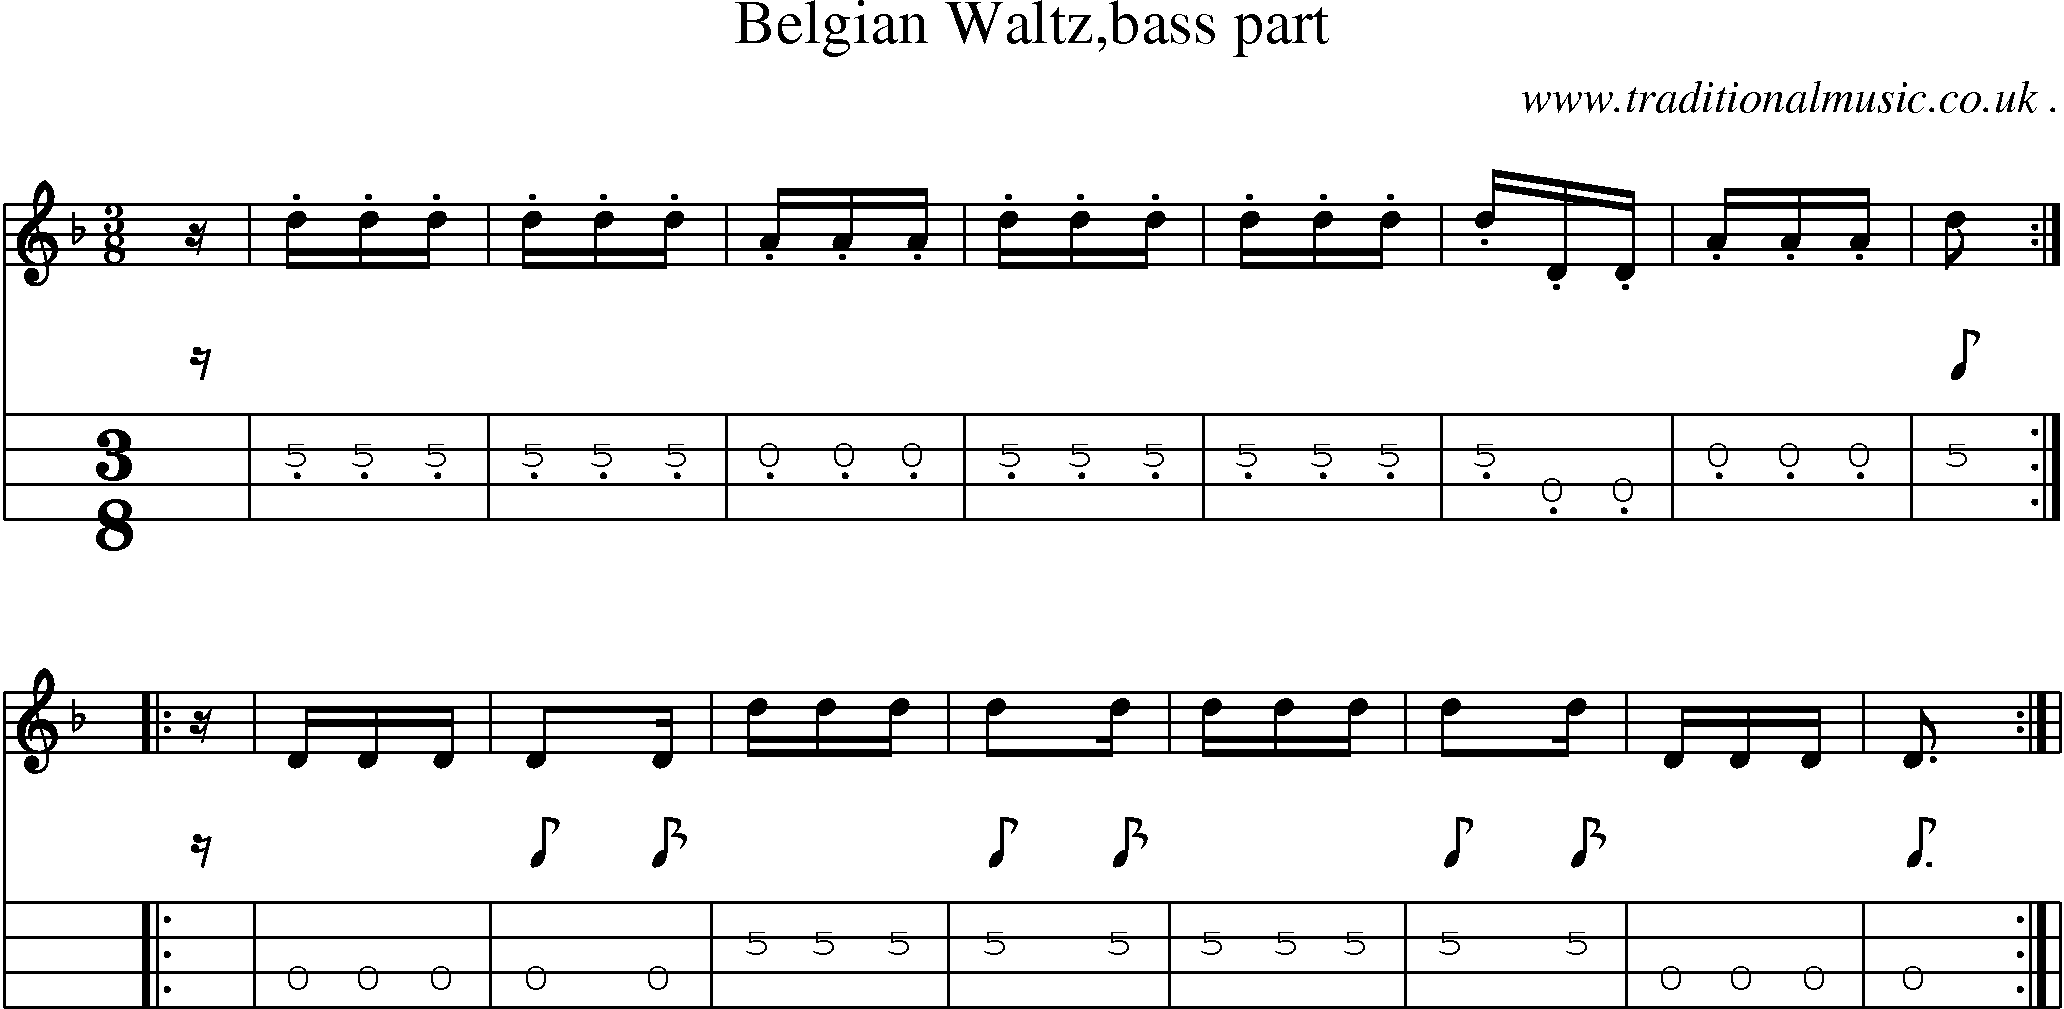 Sheet-Music and Mandolin Tabs for Belgian Waltzbass Part